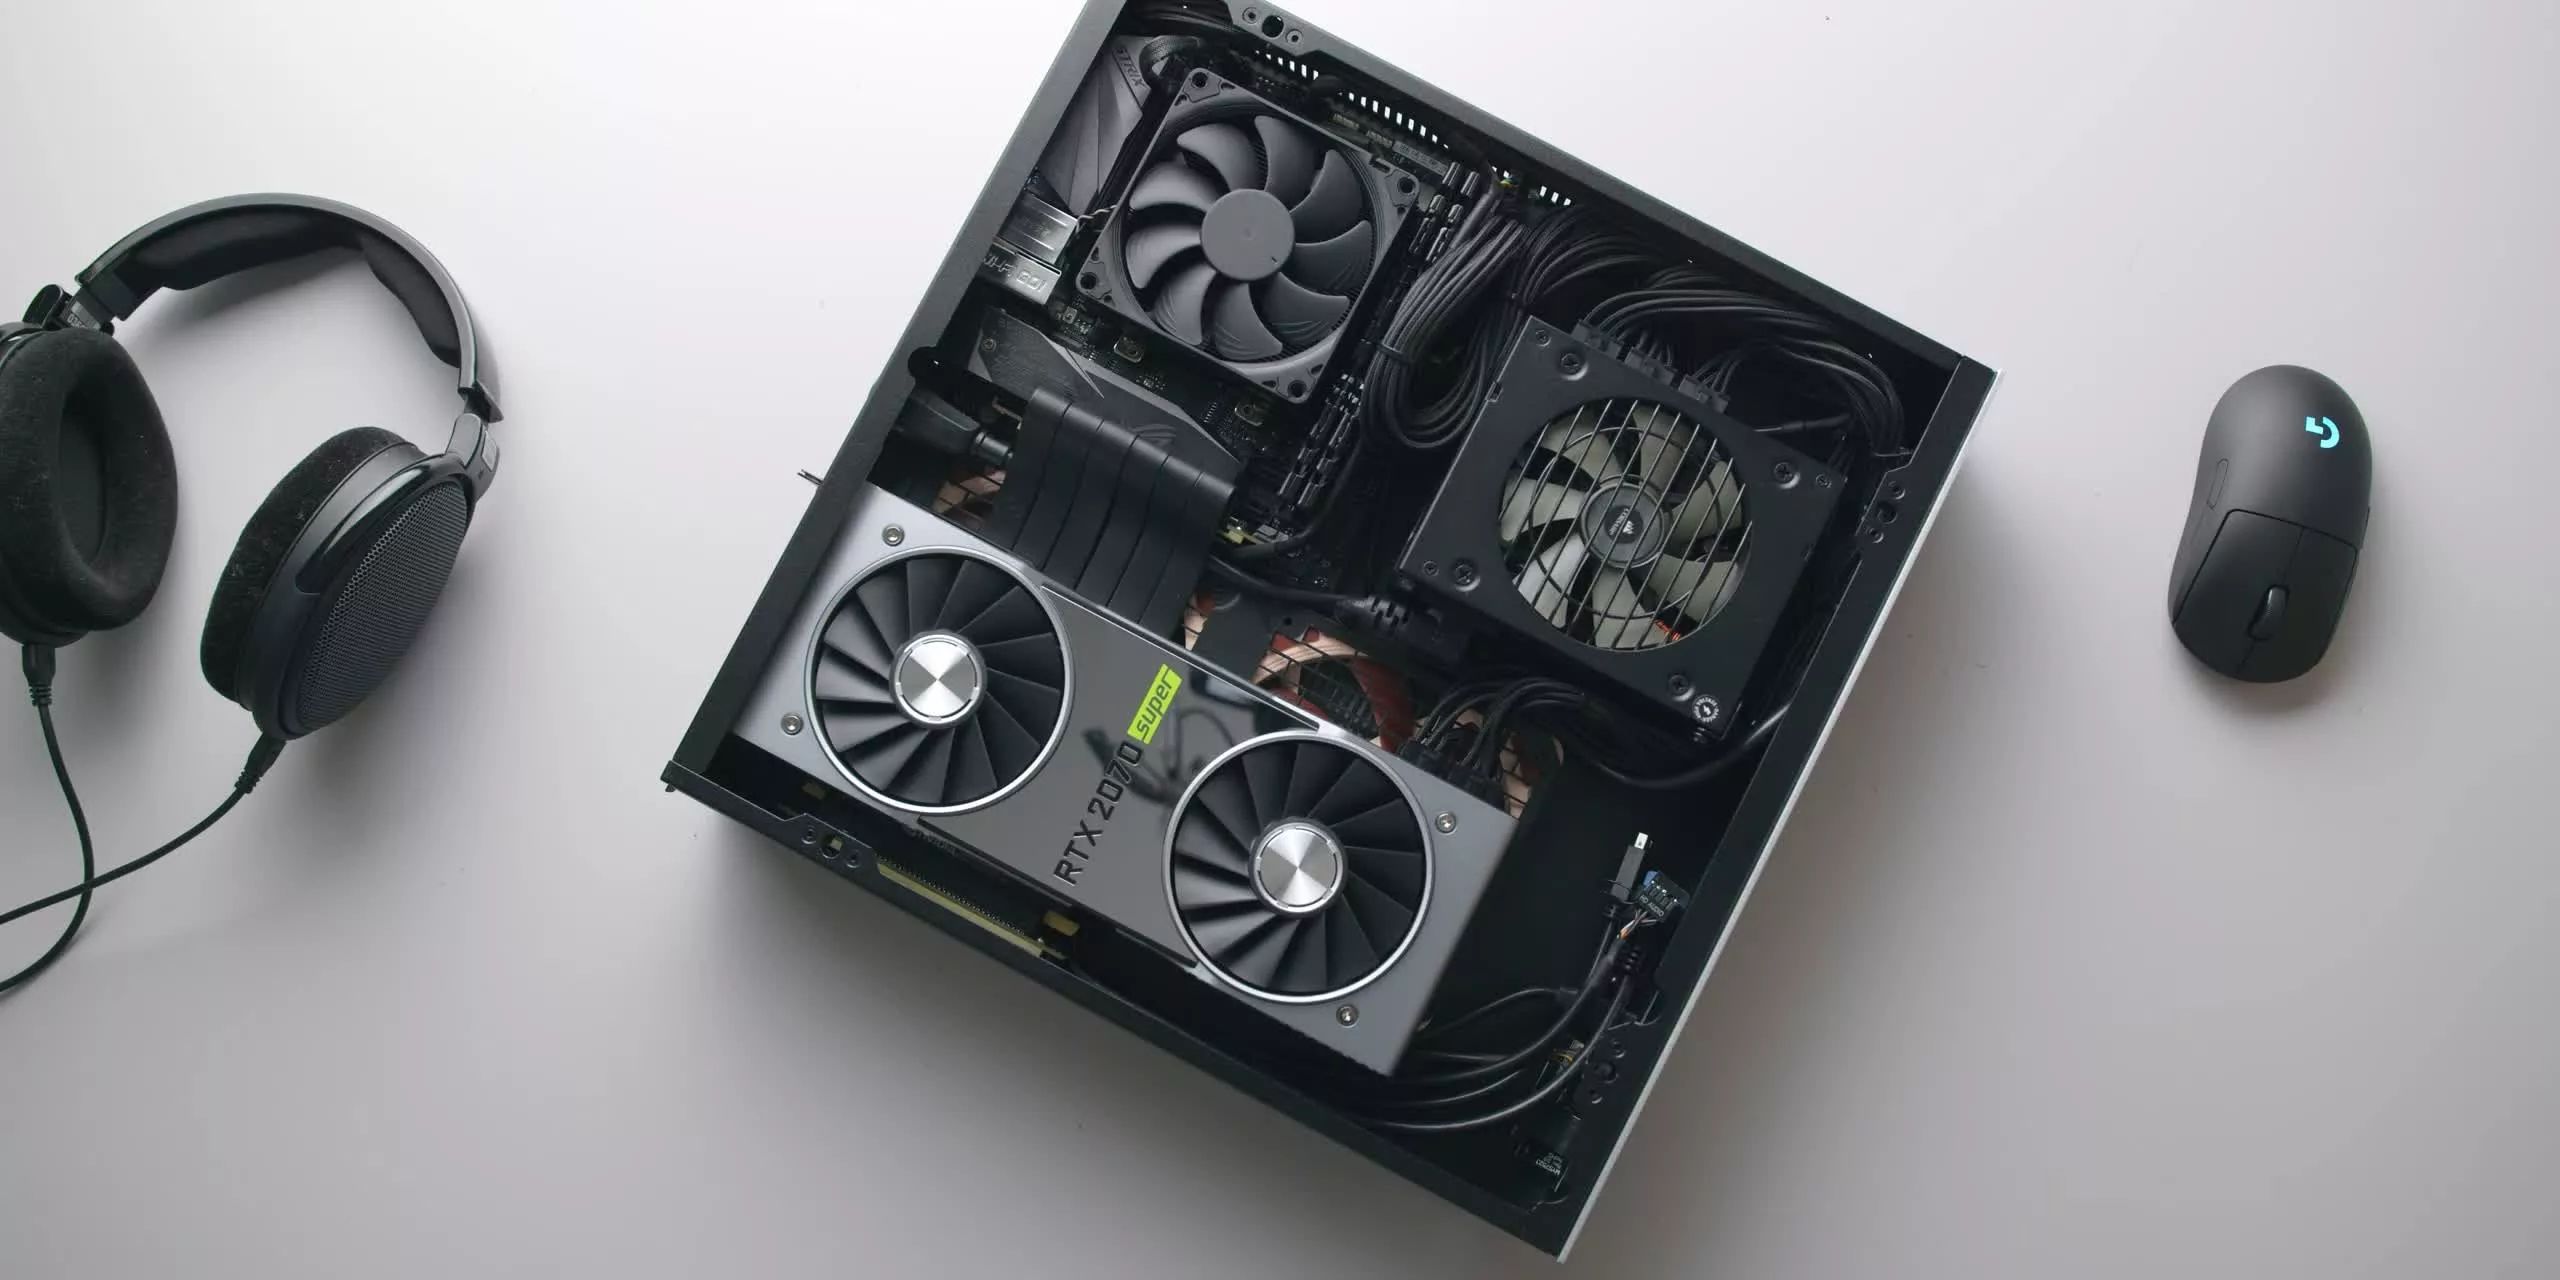 How To Tell What Form Factor A PC Case Is